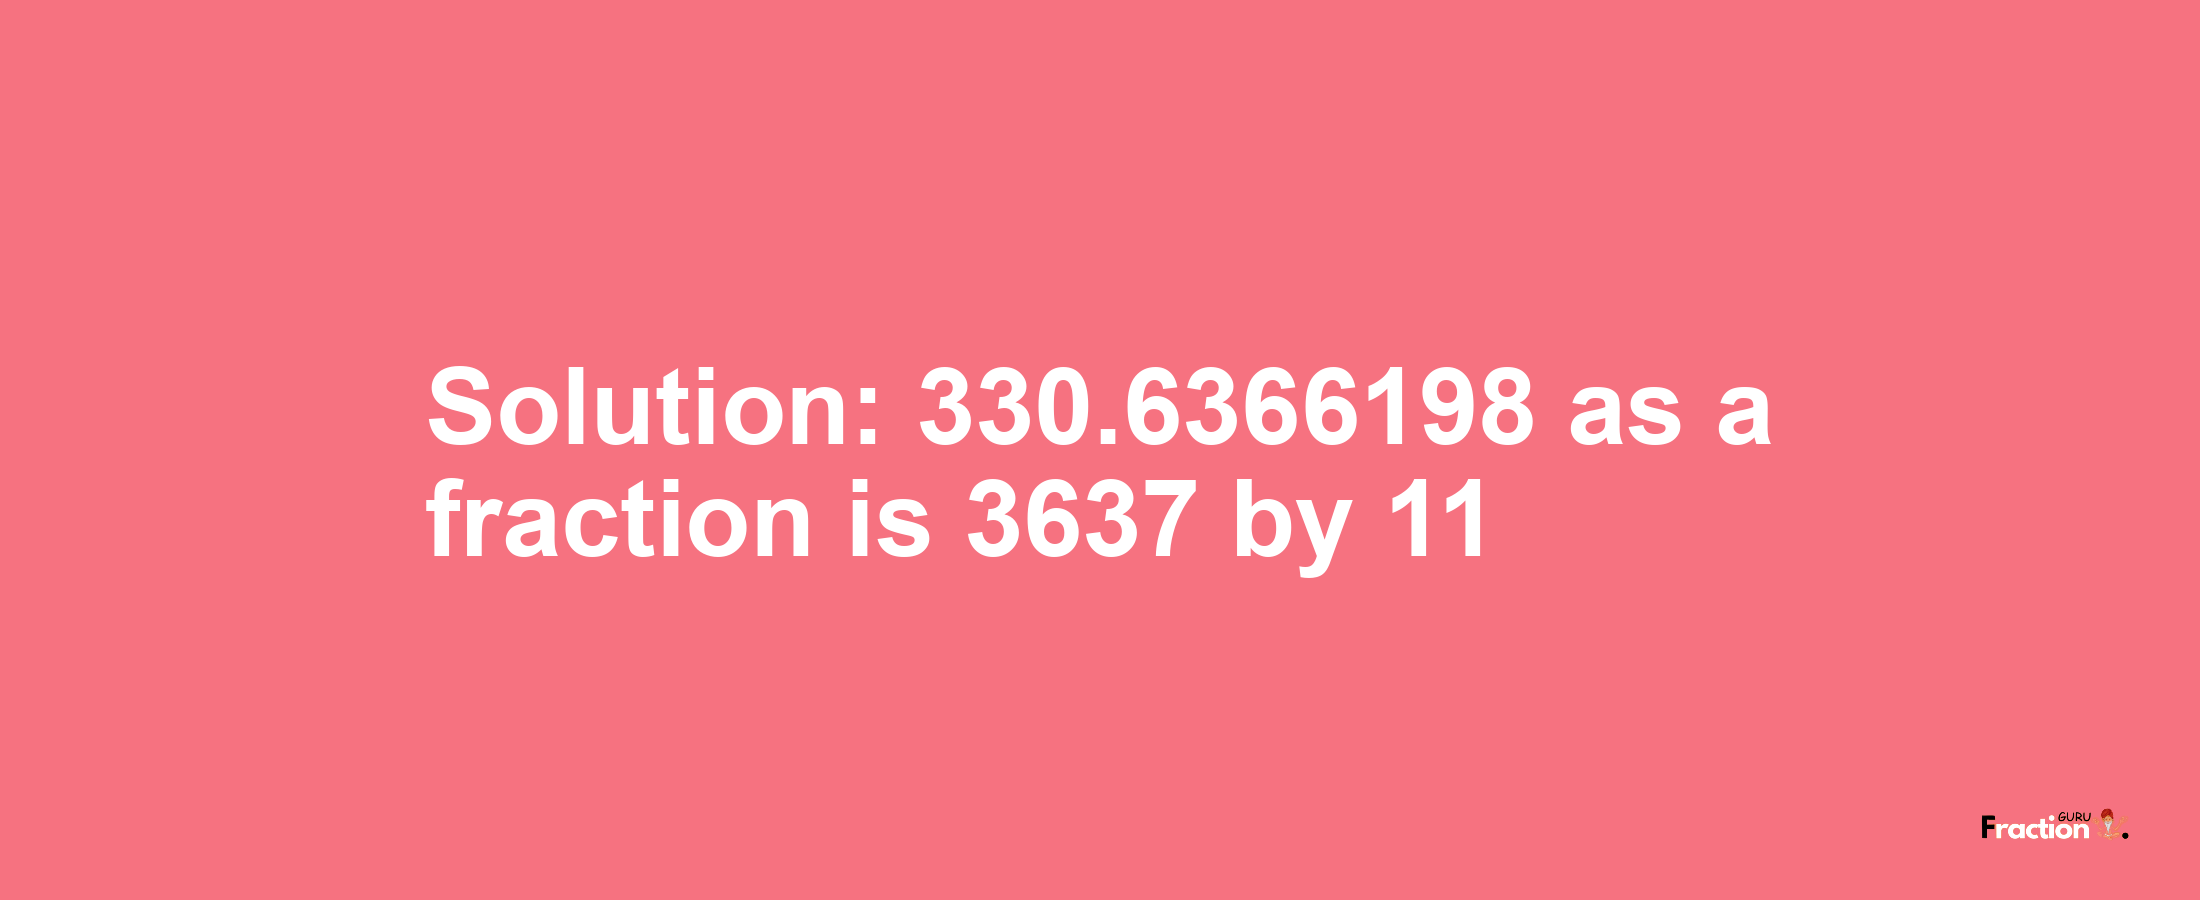 Solution:330.6366198 as a fraction is 3637/11